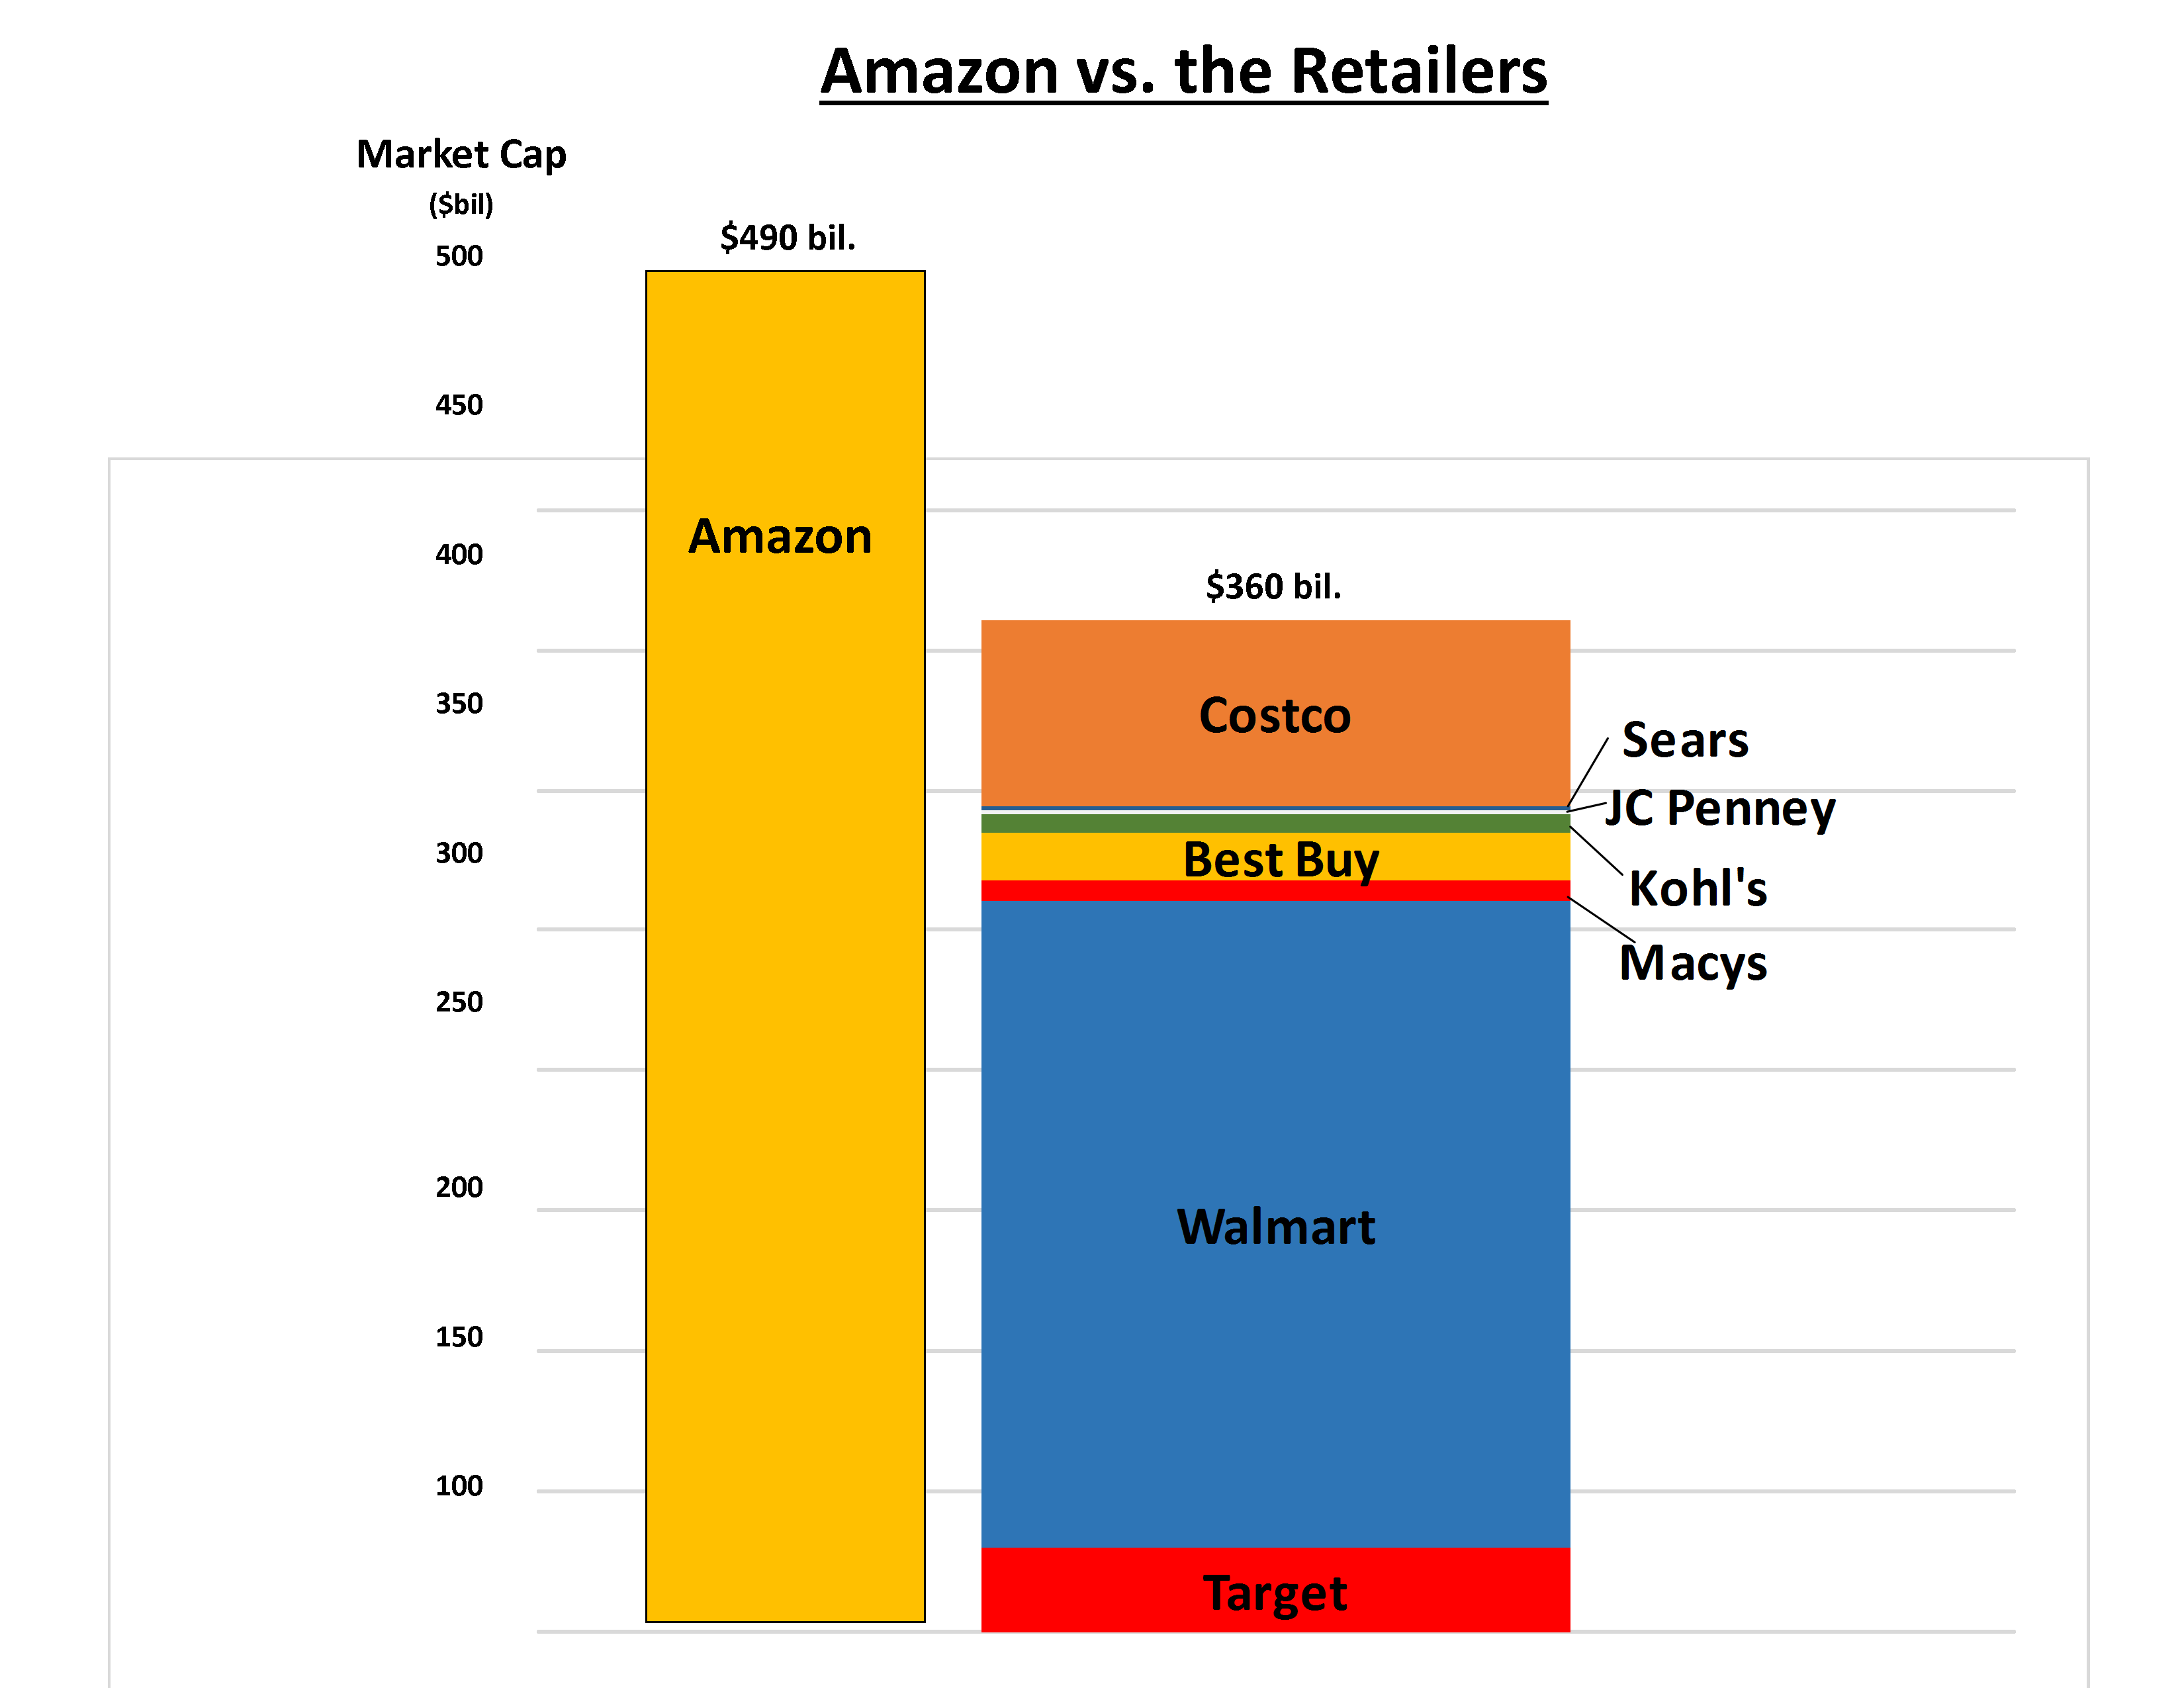 Amazon is the consumer king